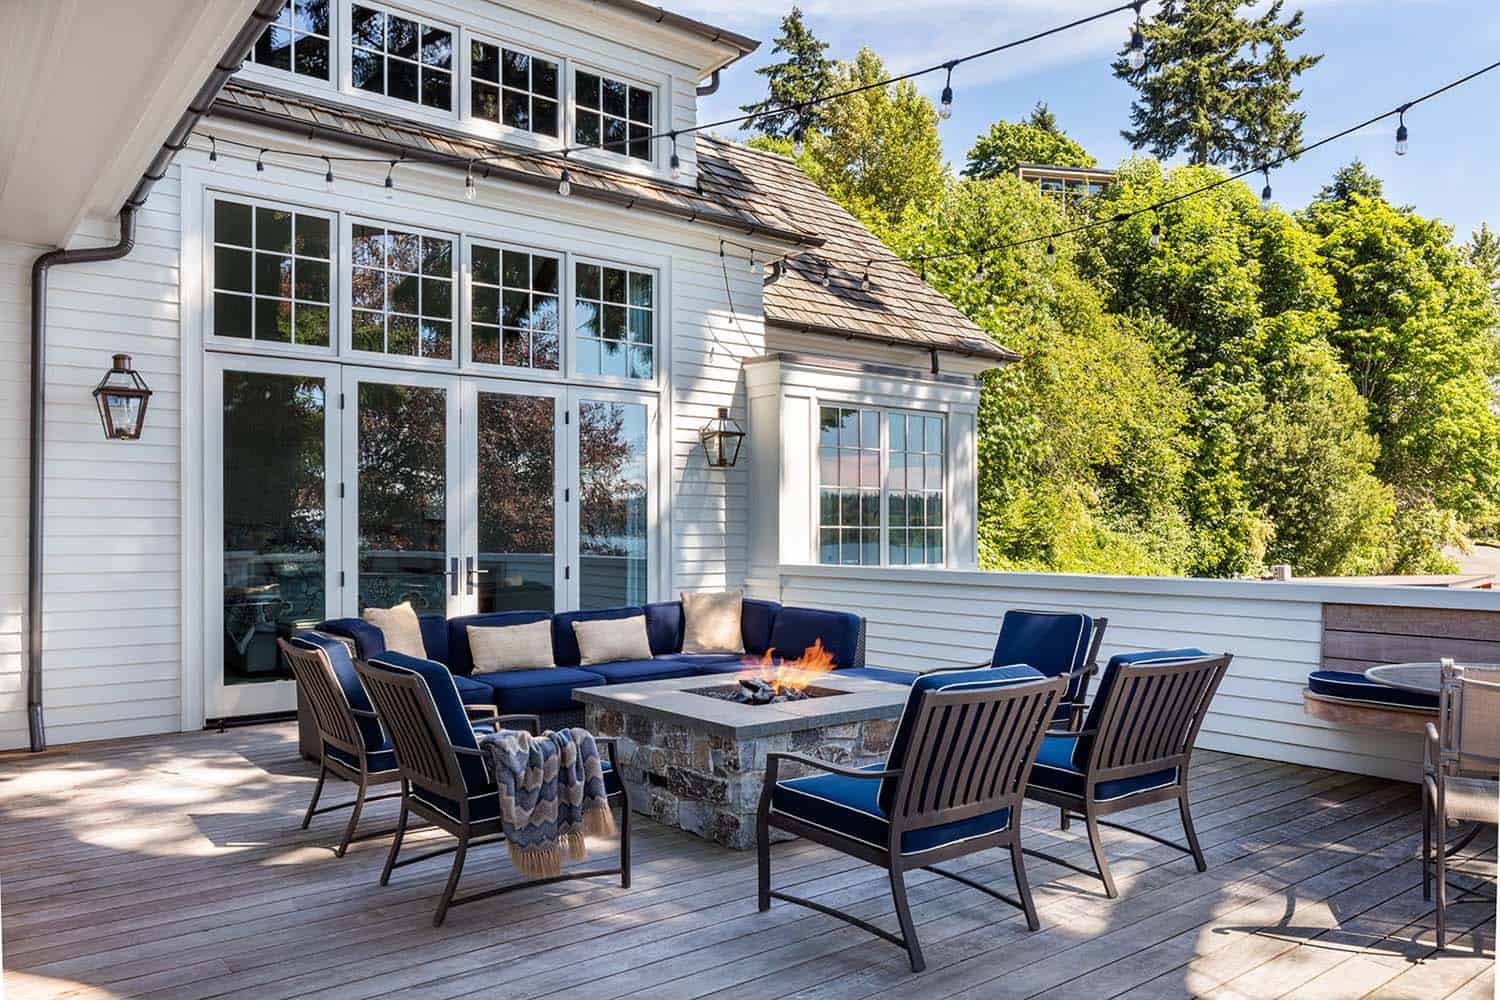 lakeside cottage home exterior patio with outdoor furniture